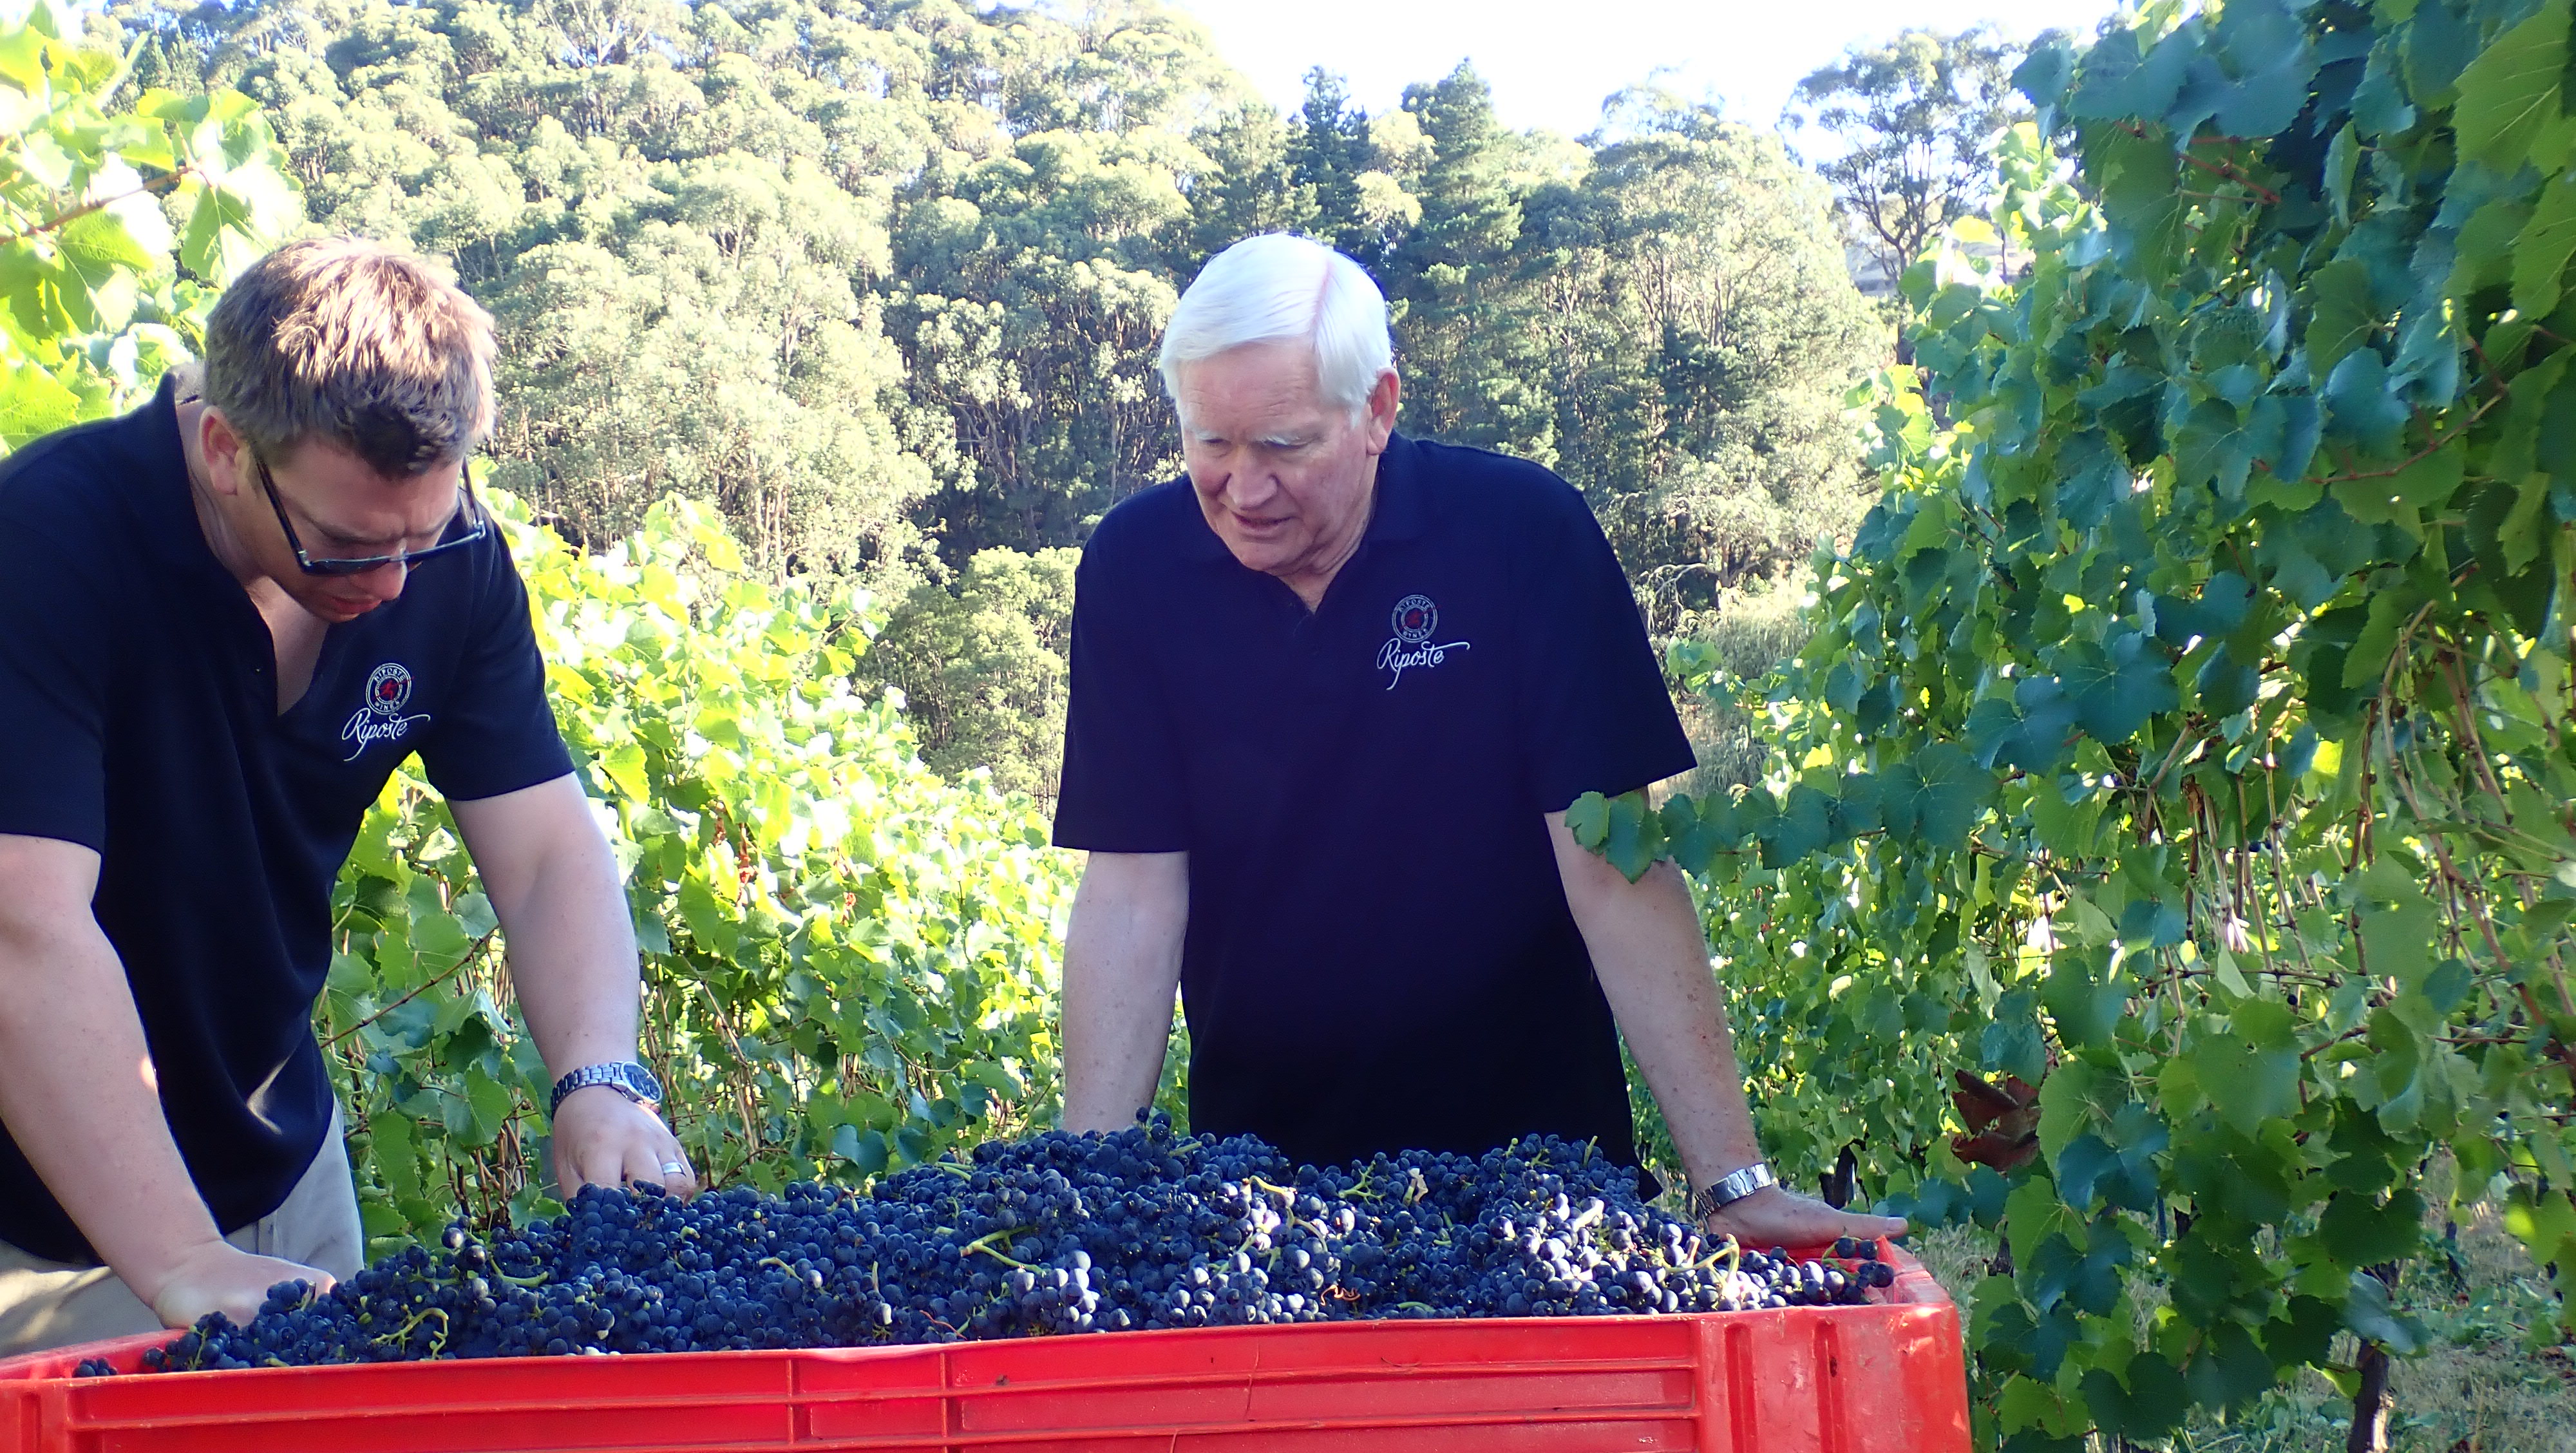 Two men inspecting harvested grapes 